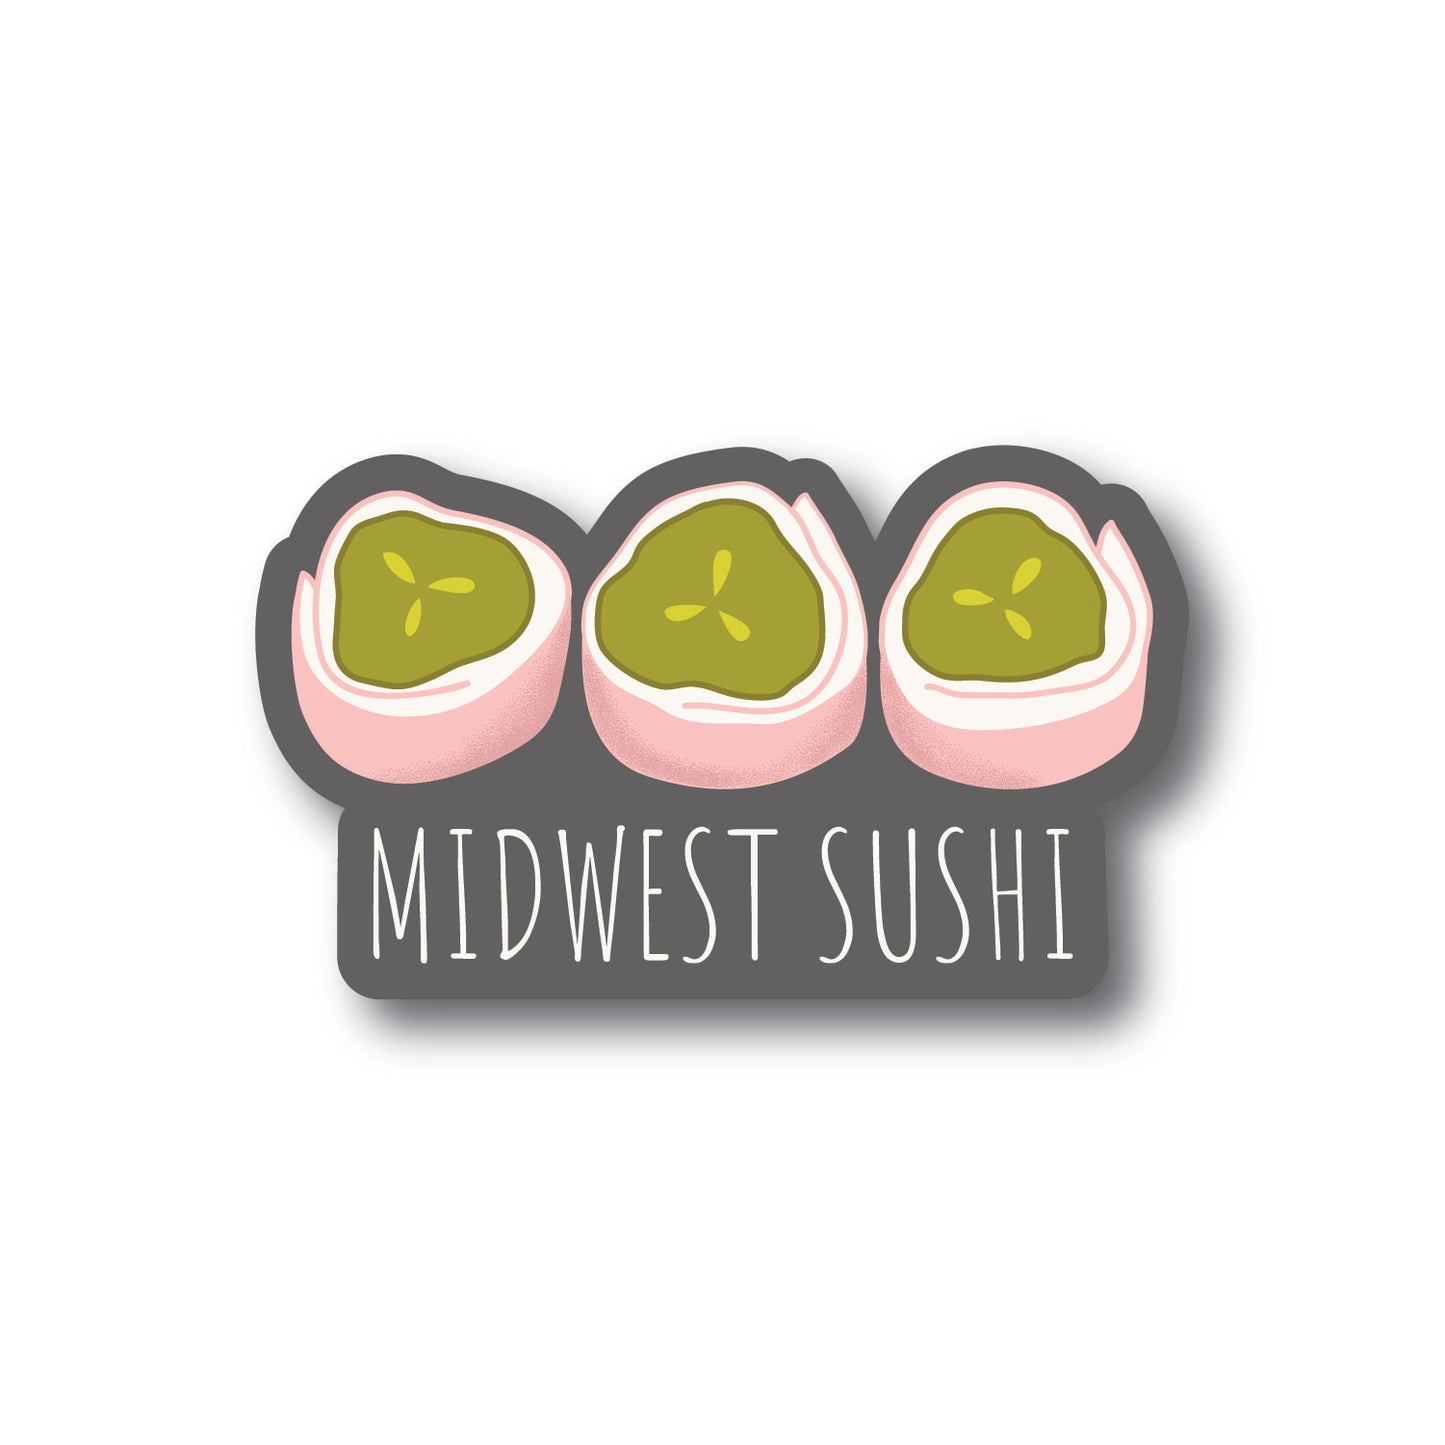 Midwest Sushi Sticker